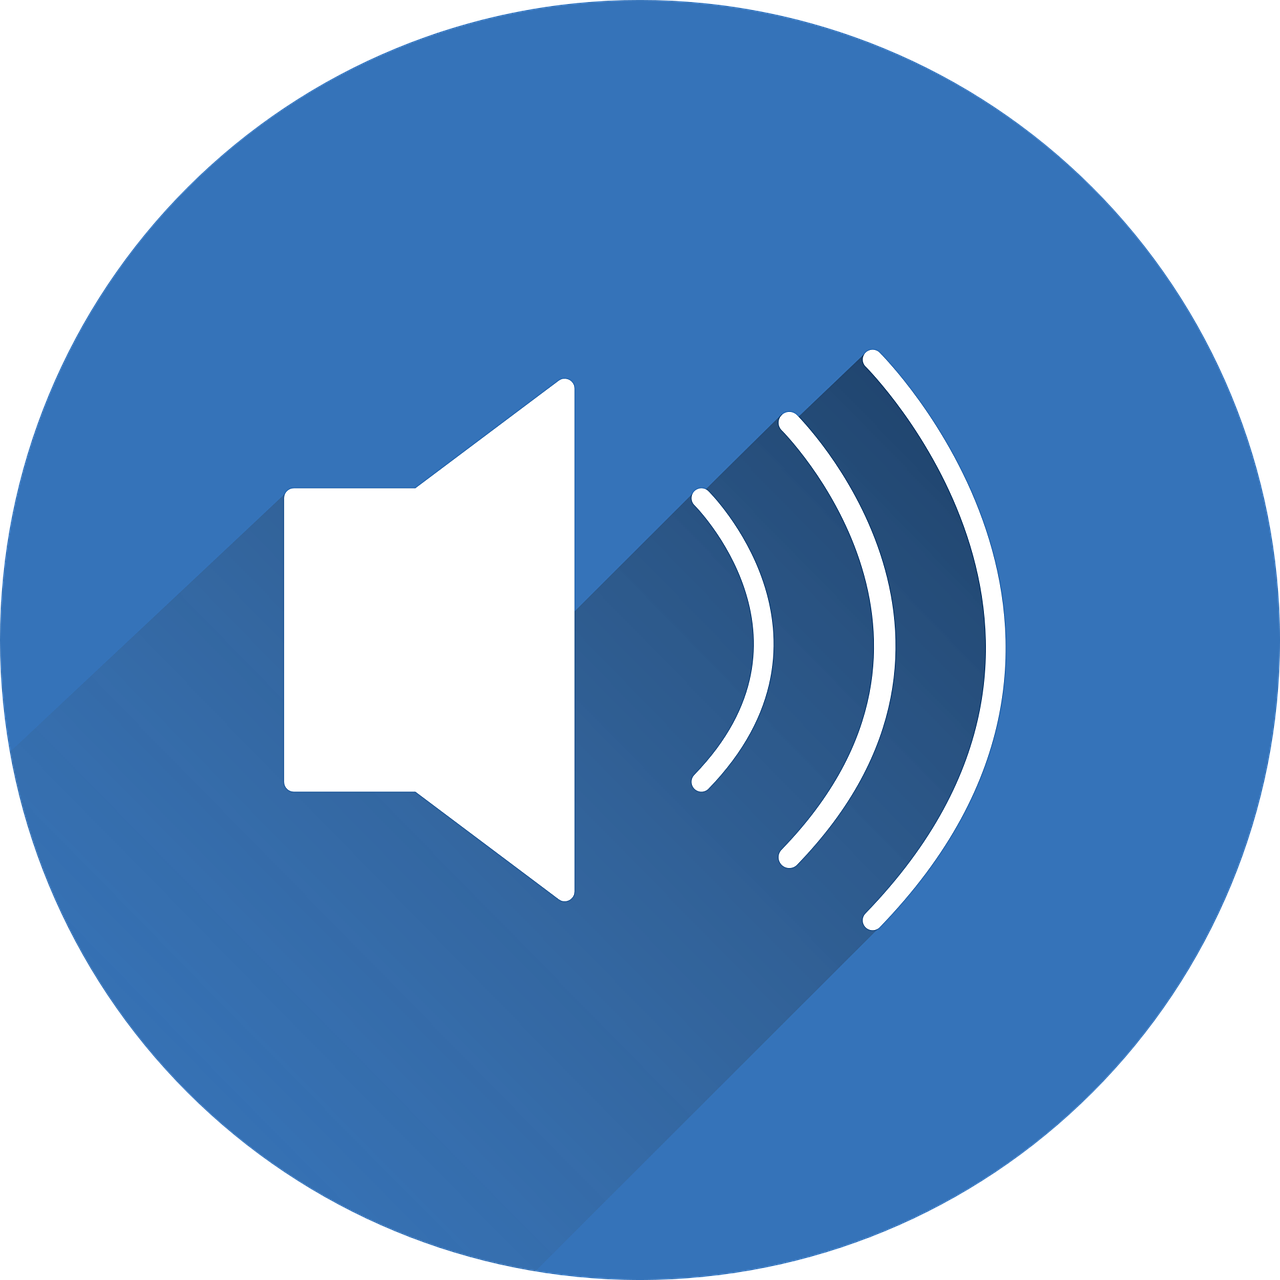 a blue circle with a white sound icon, an illustration of, by Niko Henrichon, pixabay, mingei, speakers, volume flutter, cone, excellent